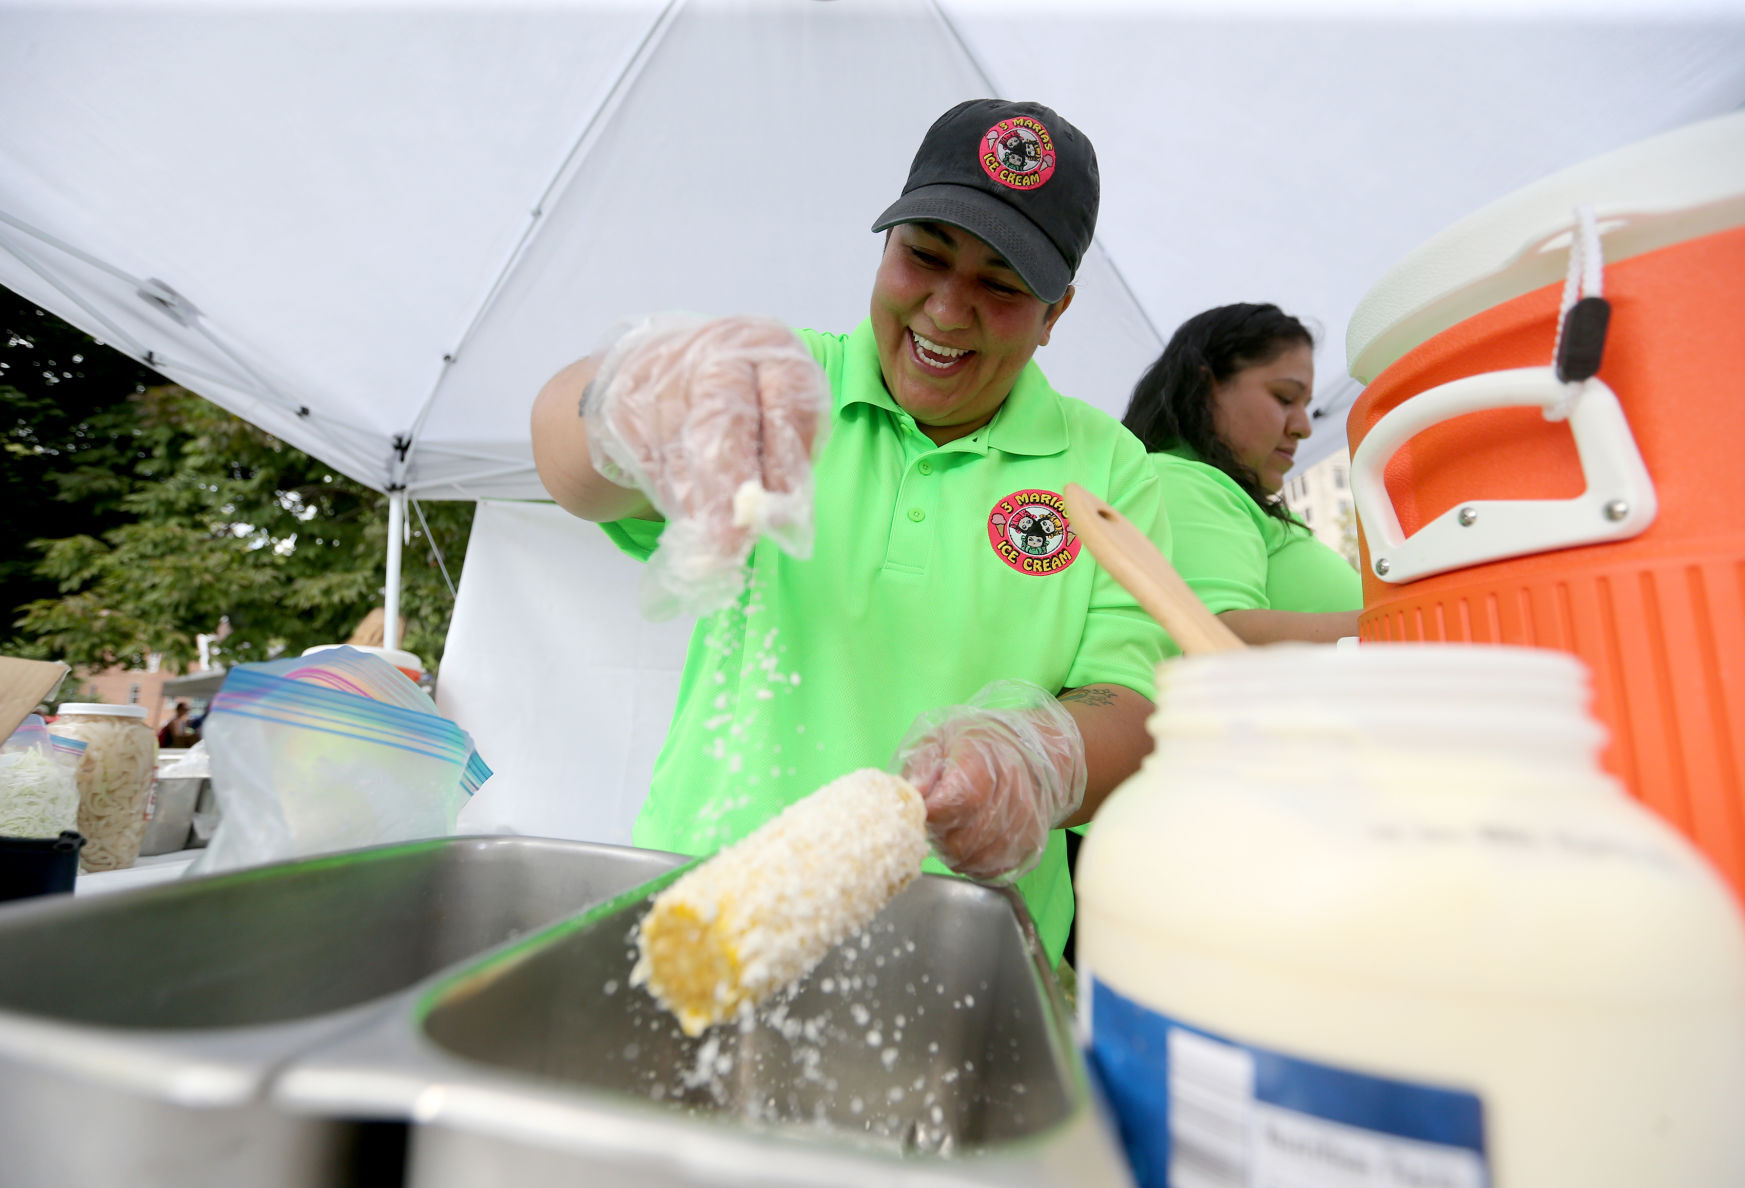 Lizbeth Moreno, with 3 Marias Ice Cream in Platteville, Wis., makes elote during the recent Dubuque Latinx Fiesta.    PHOTO CREDIT: BY GARY DURA
gary.dura@thmedia.com